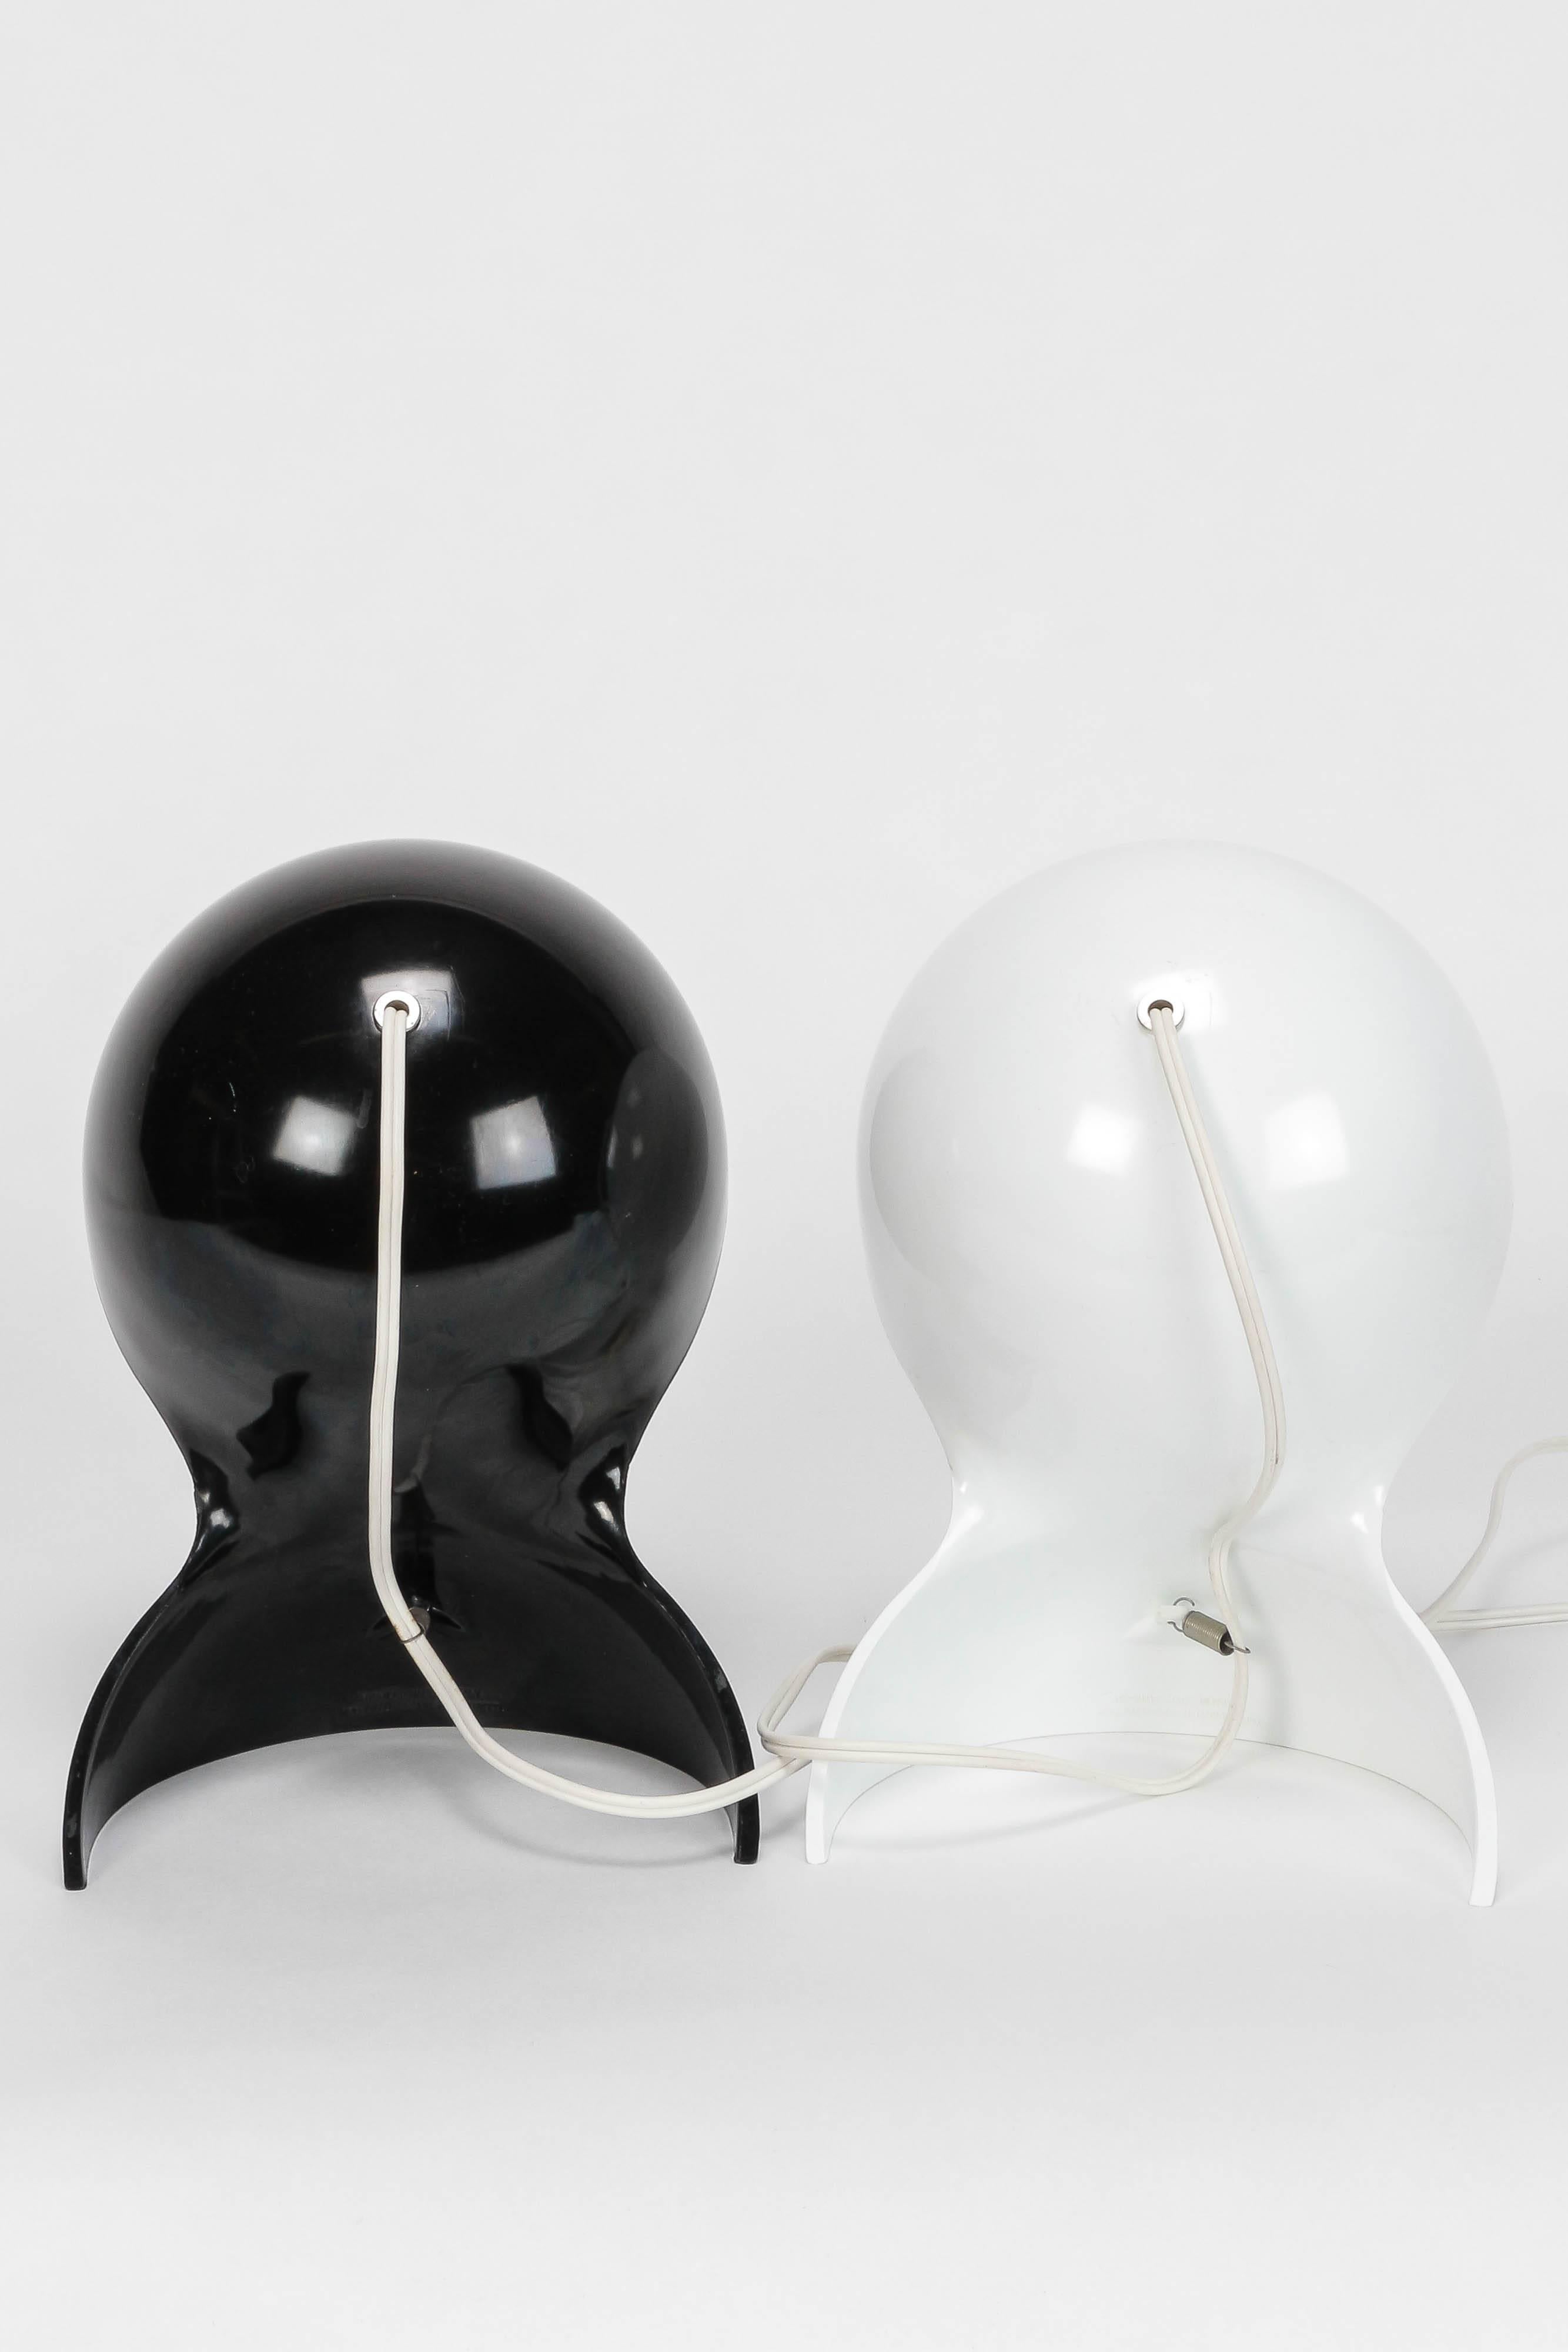 Pair of Dalù Table Lamps Vico Magistretti for Artemide, 1969 In Excellent Condition For Sale In Basel, CH